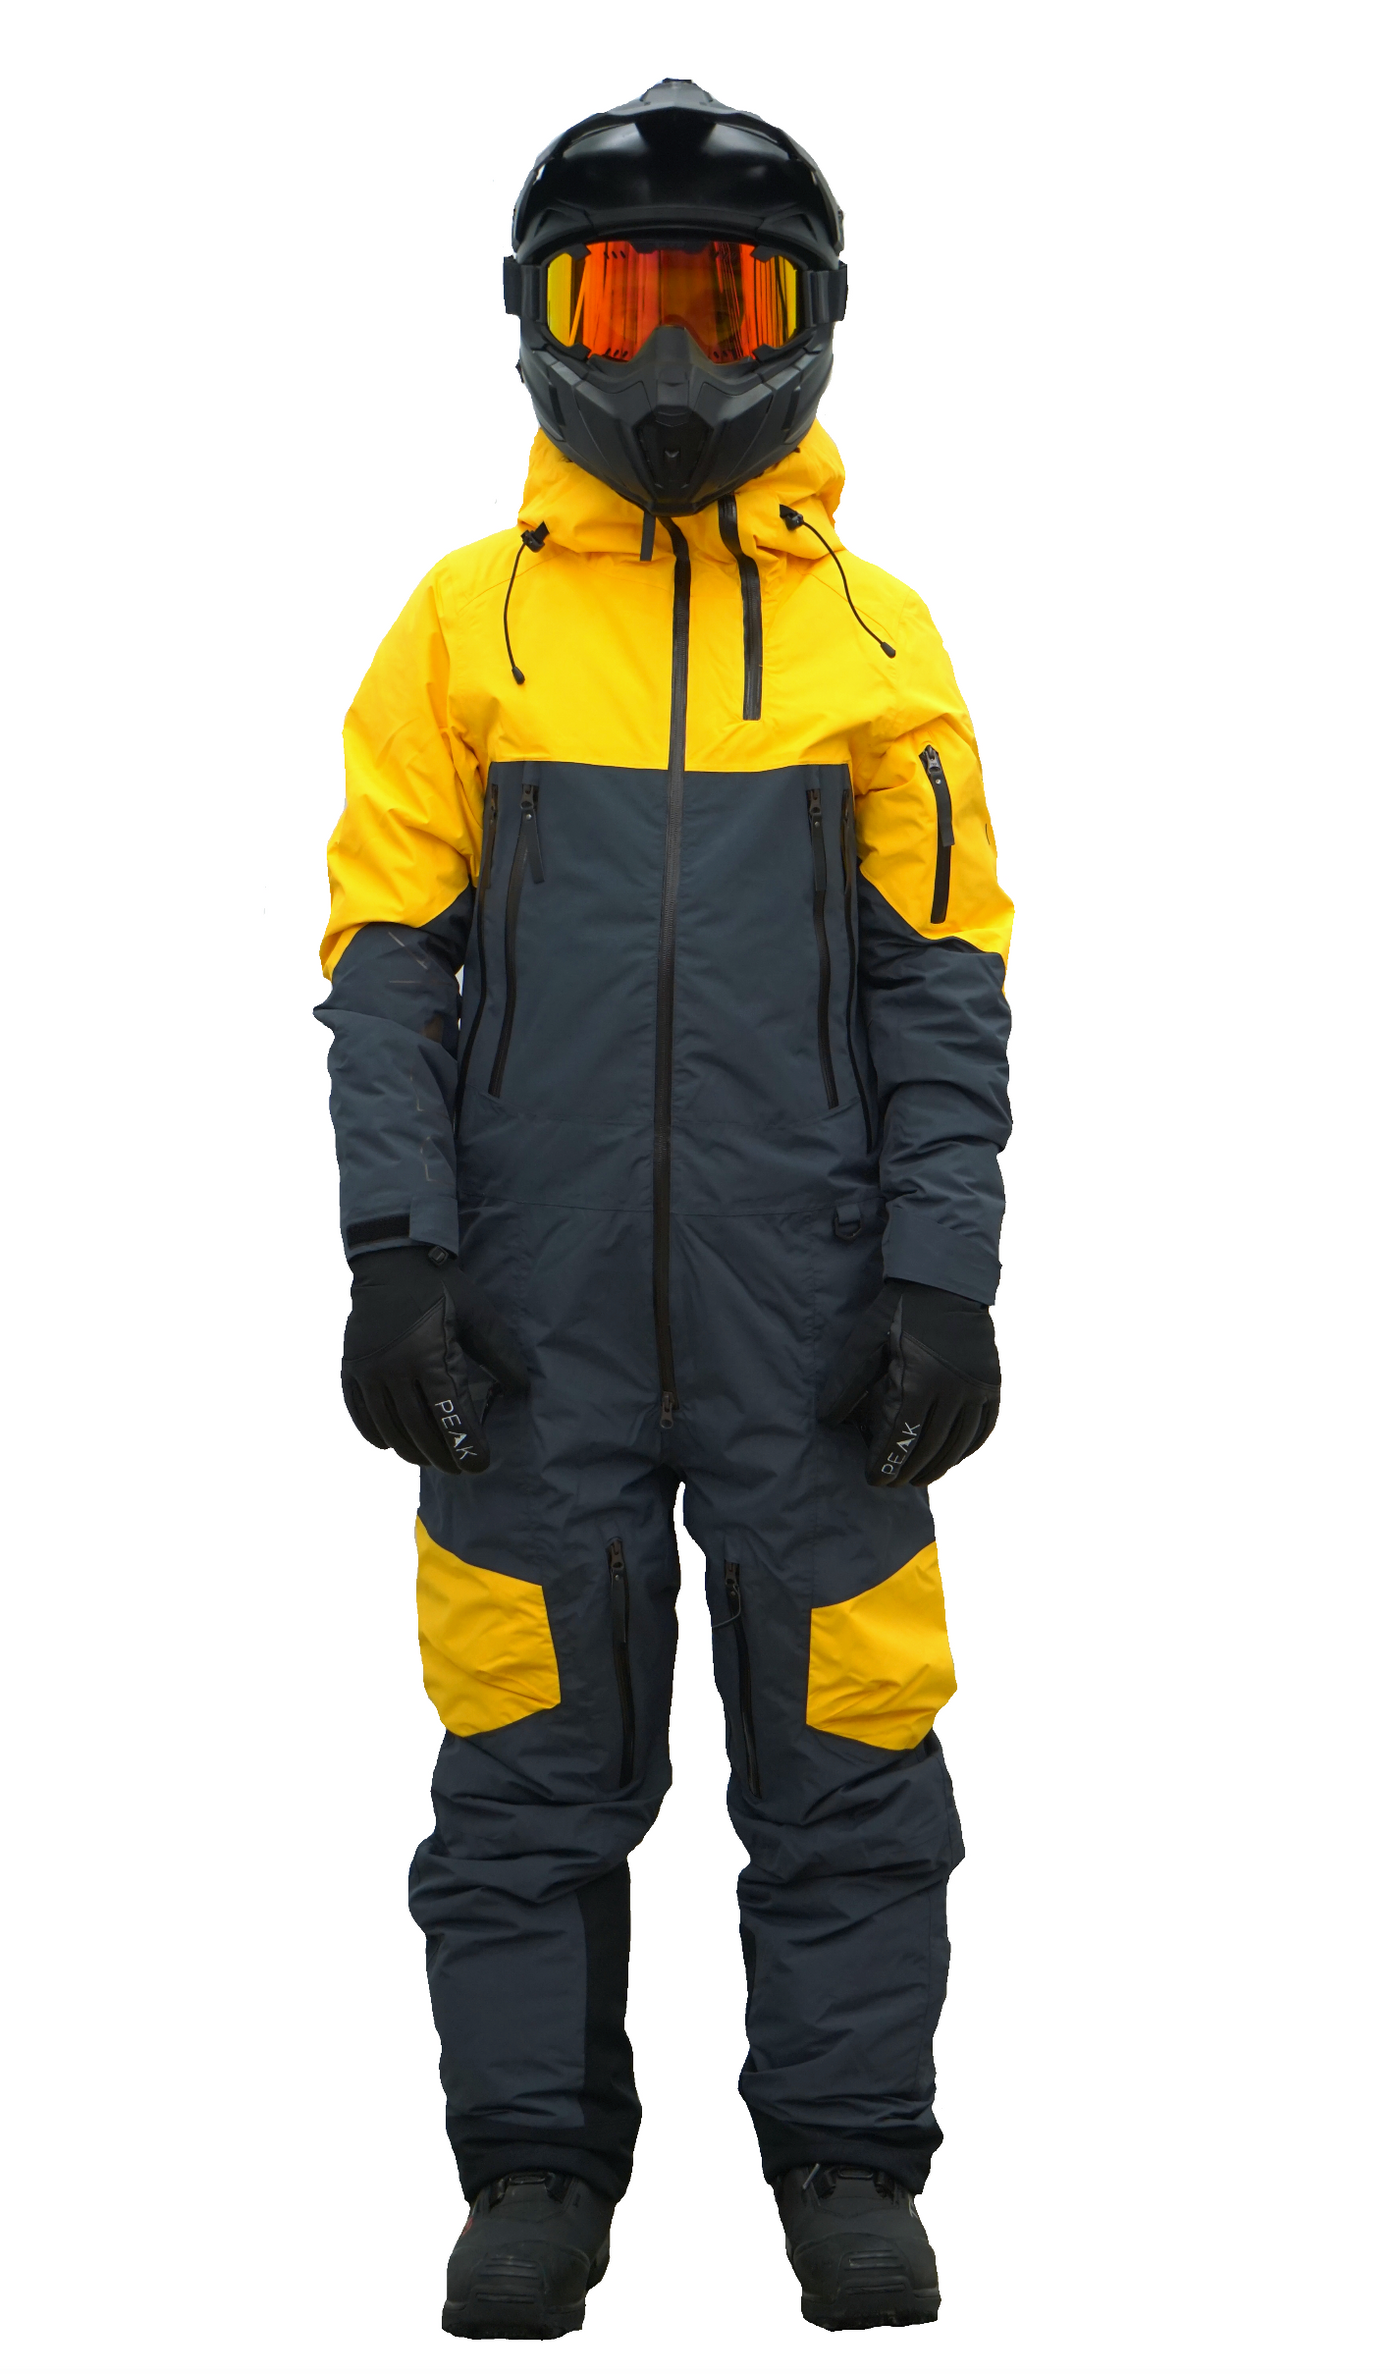 Monosuit W22 - Navy Gray and Yellow Insulated